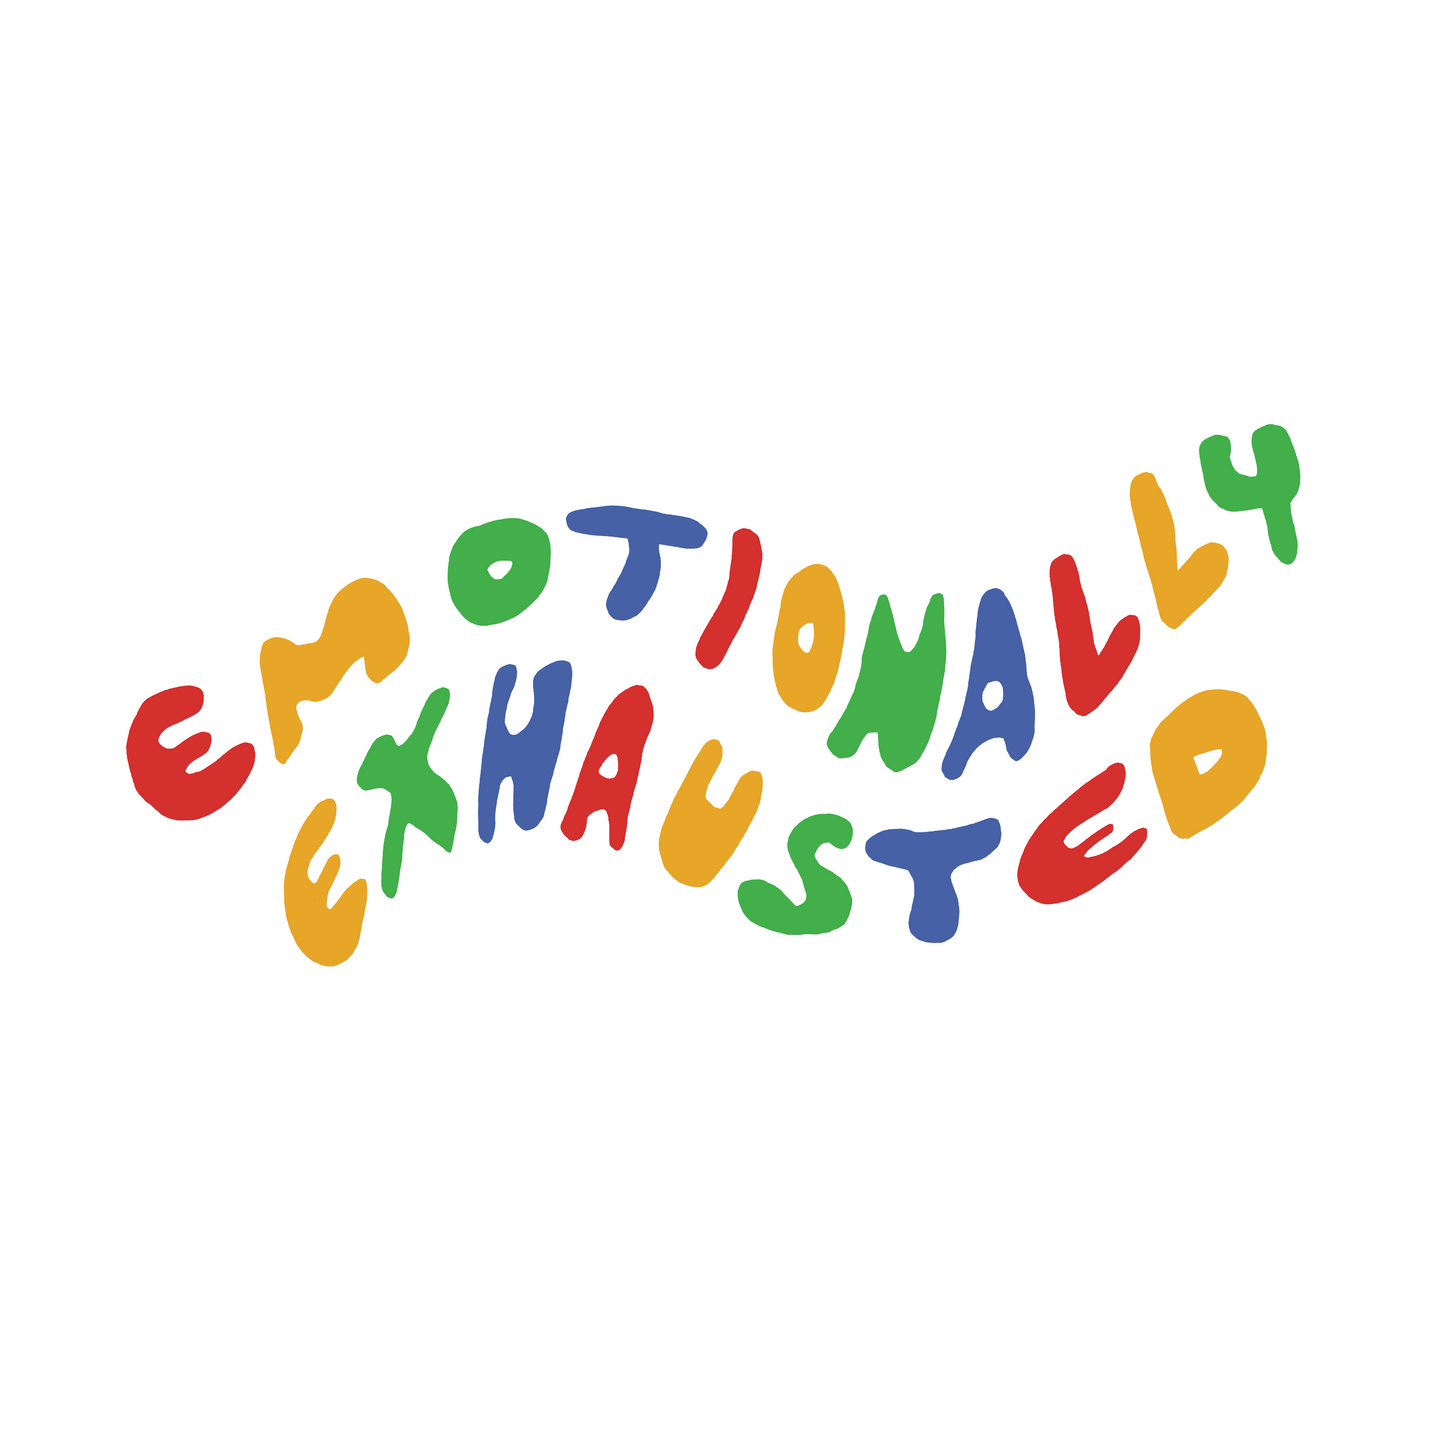 emotionally exhausted sticker